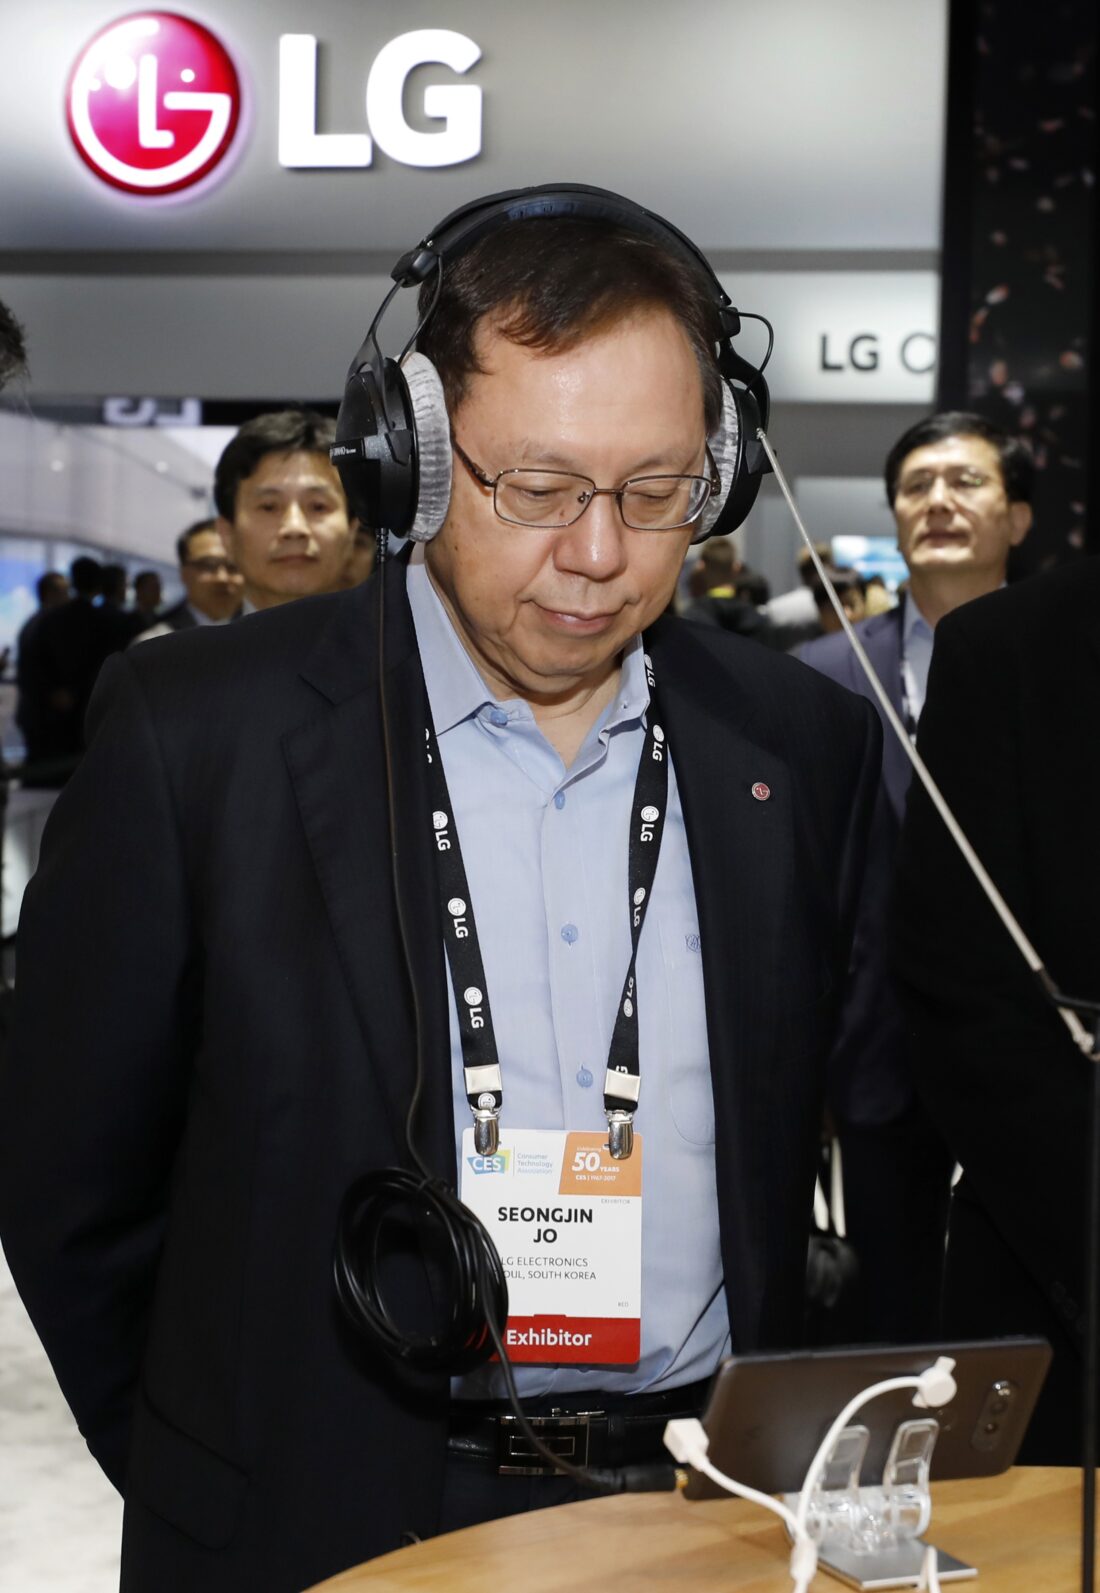 Jo Seong-jin, Vice Chairman and Chief Executive of LG Electronics tests the sound quality of LG's new smartphone via headphones at the company's CES booth.